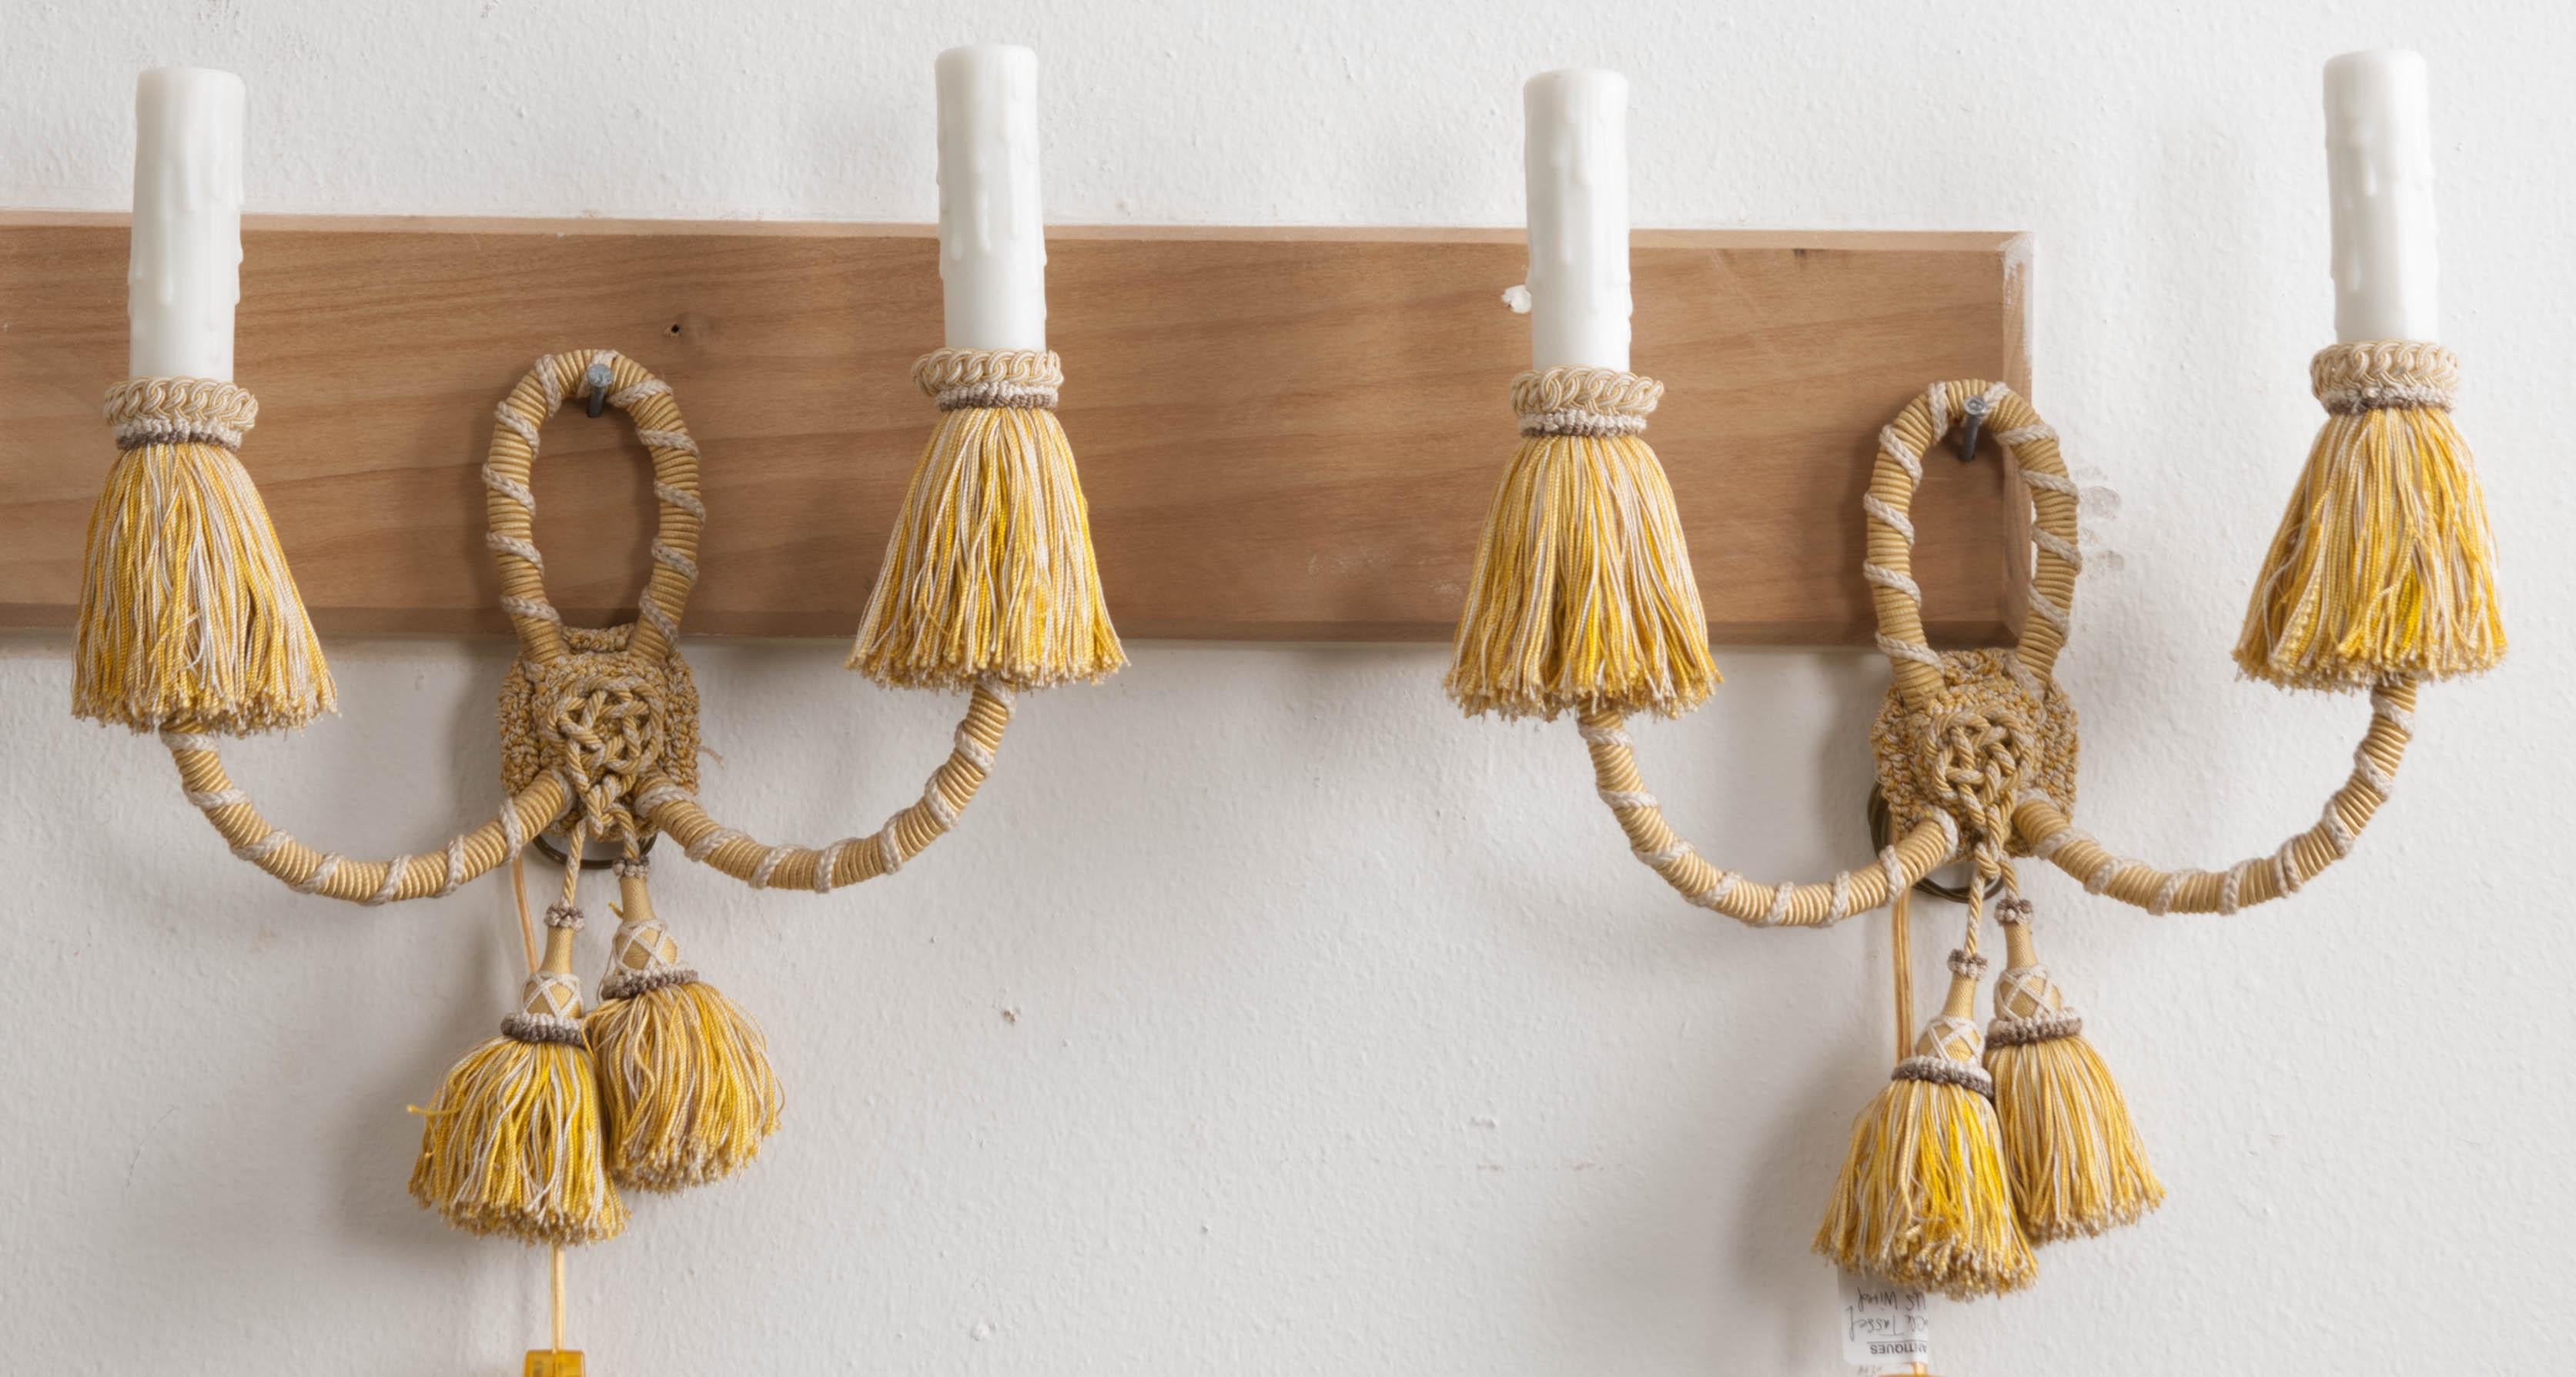 This fine pair of two-arm sconces, from France, circa 1900s, are covered in a pale gold and ivory cording with taupe accents. The faux candlesticks sit above a braided and fringed gimp and are mounted on upward scrolling arms joined by a central